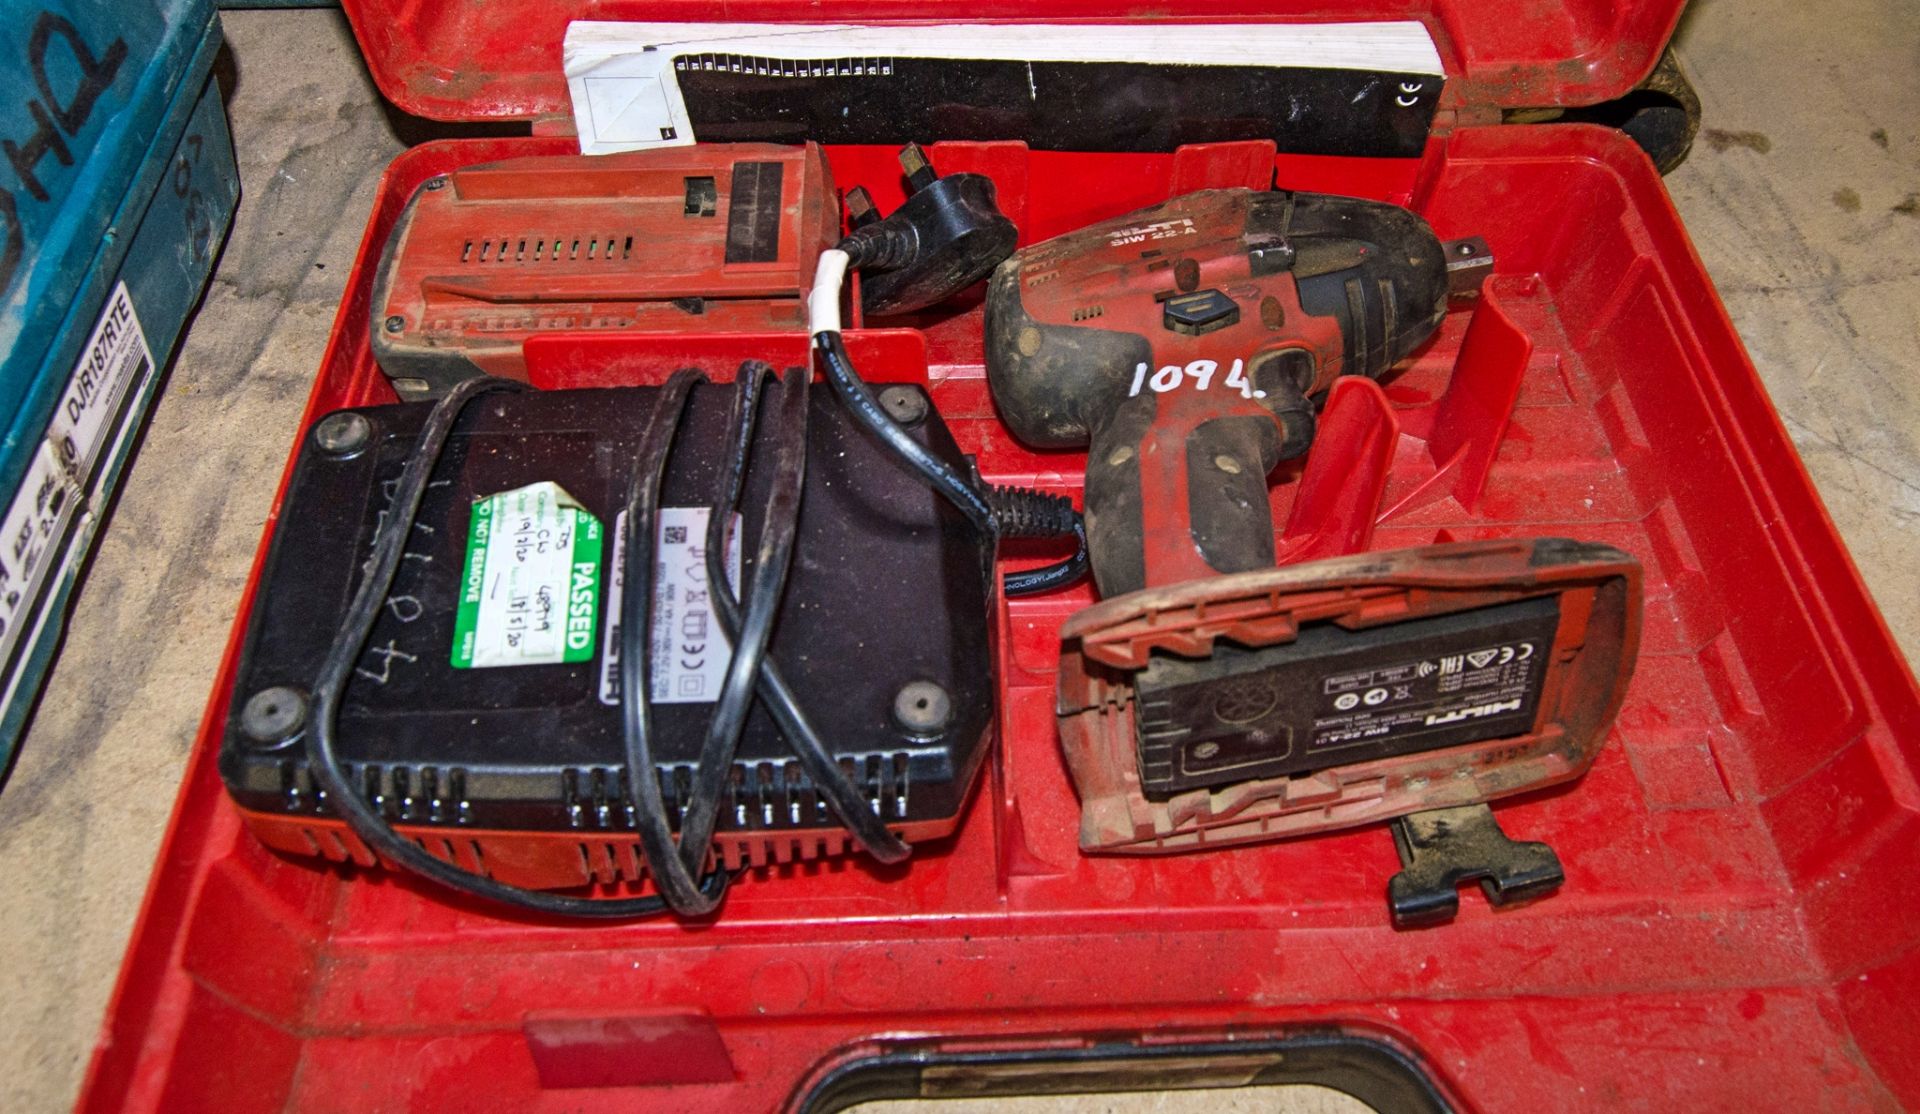 Hilti SIW 22-A 22v cordless 1/2 inch impact gun c/w battery, charger and carry case 48979